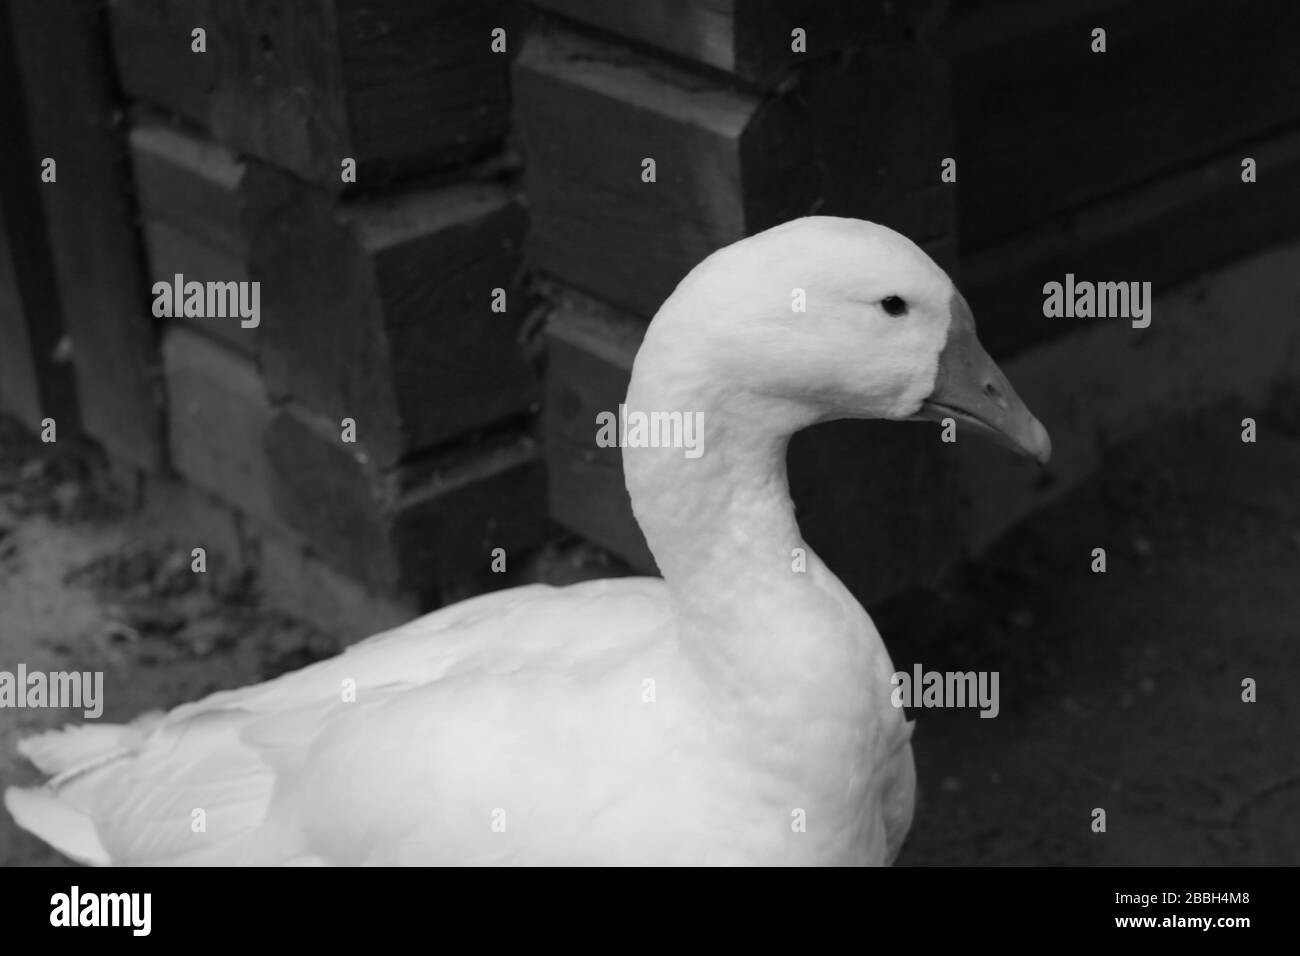 A beautiful white domestic goose is standing and looking attentively. Poultry Stock Photo